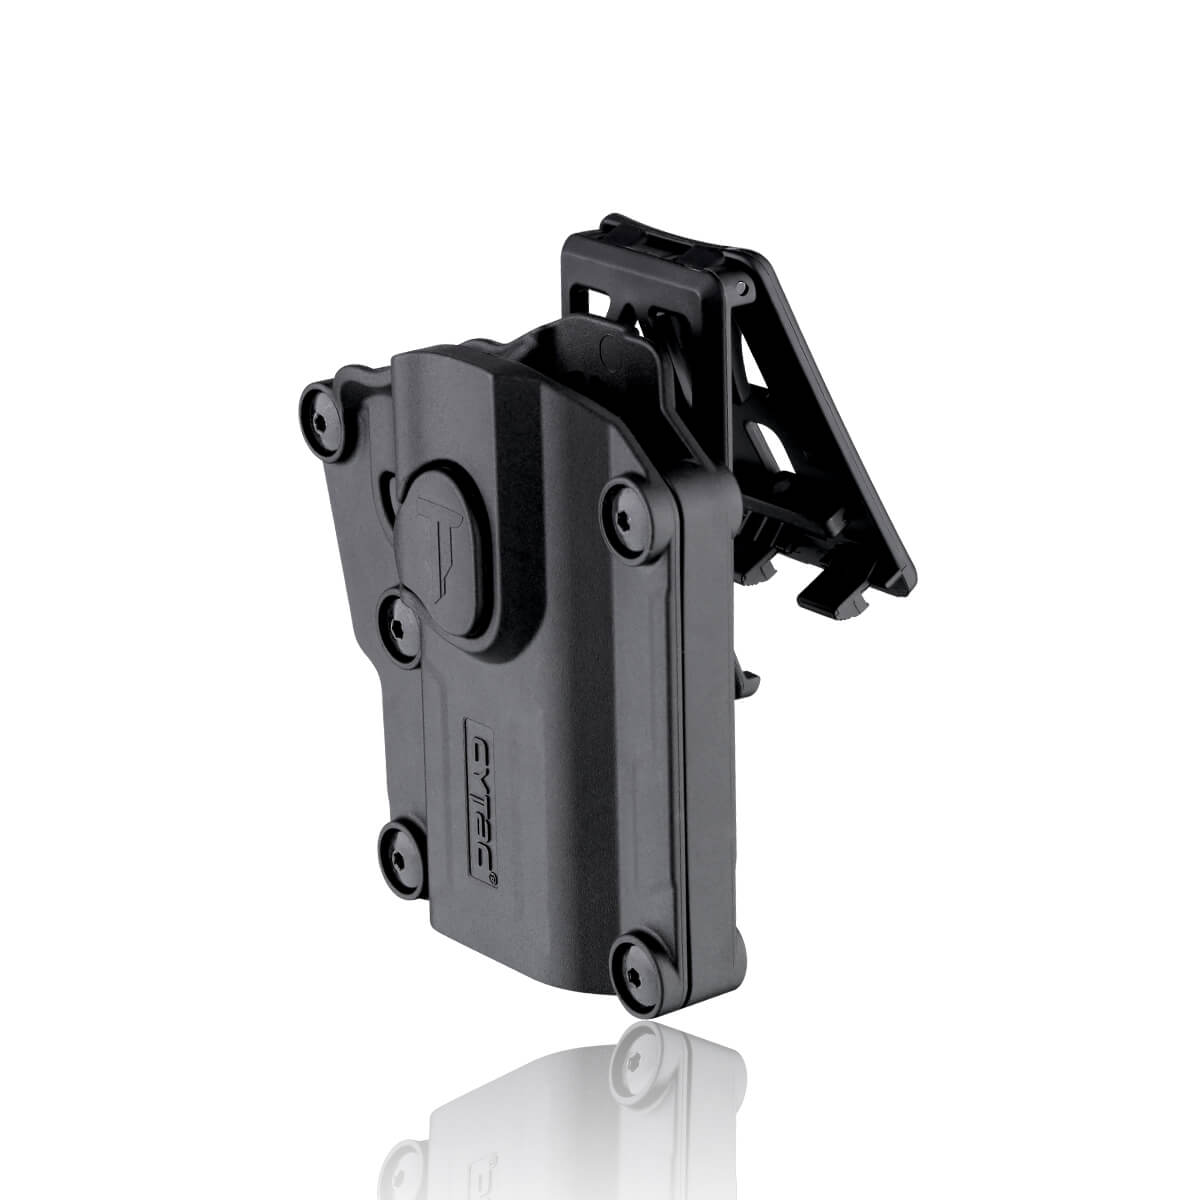 Cytac Mega Fit Holster - Fits guns from Glock, Beretta, Sig Sauer, Taurus, ETC. - Eminent Paintball And Airsoft